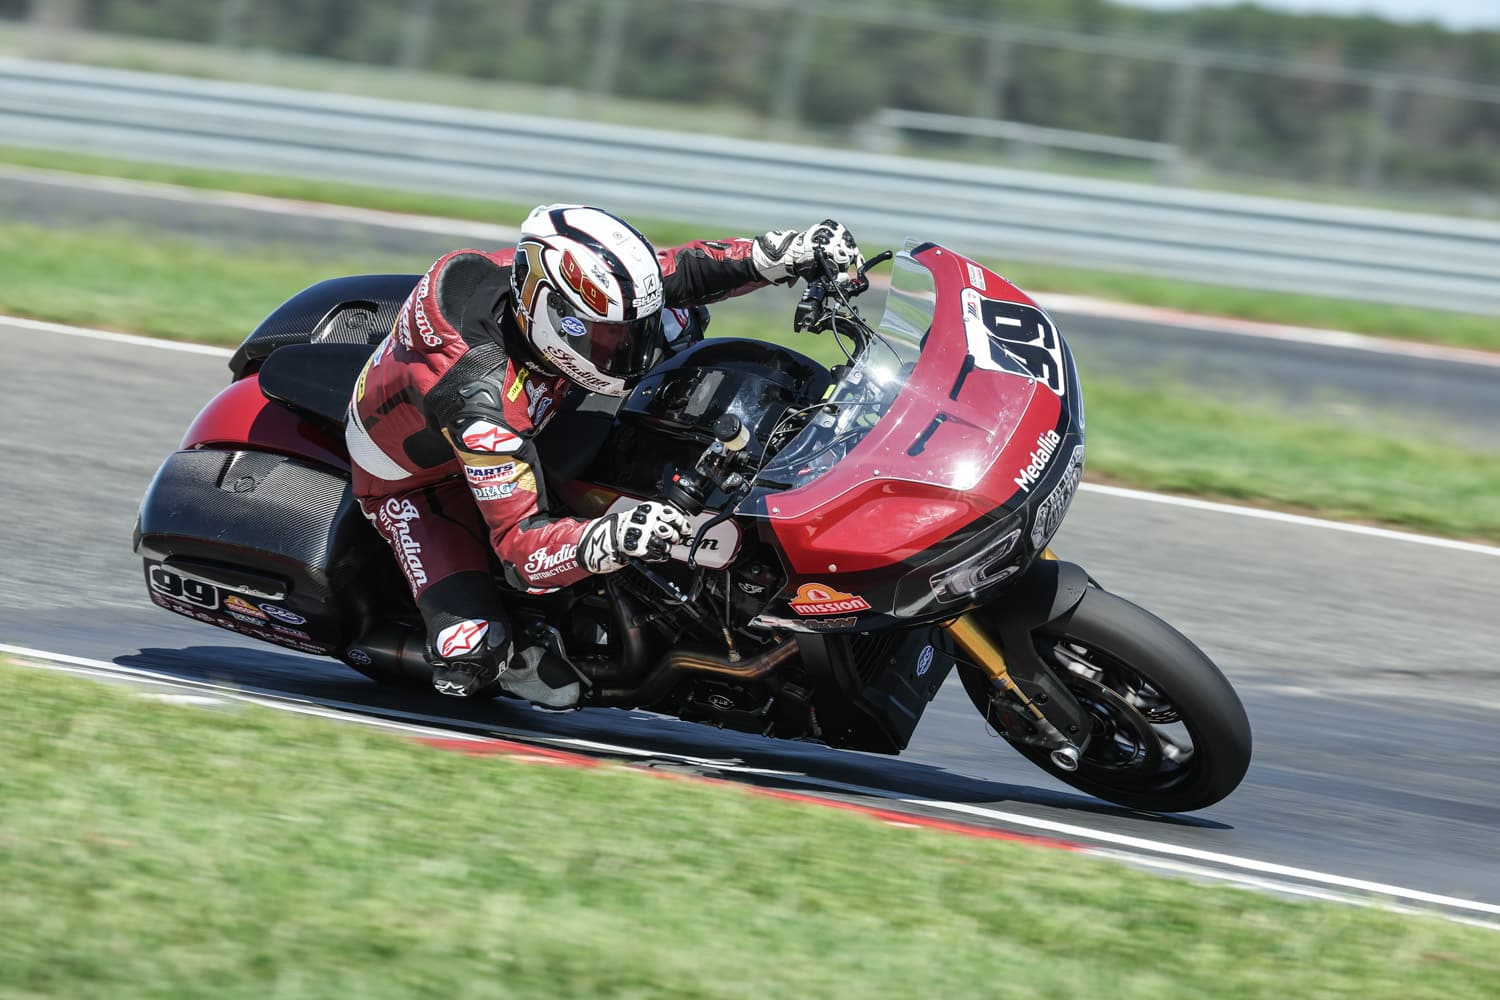 Tyler O'Hara remporte le championnat MotoAmerica Mission King Of The Baggers 2022 